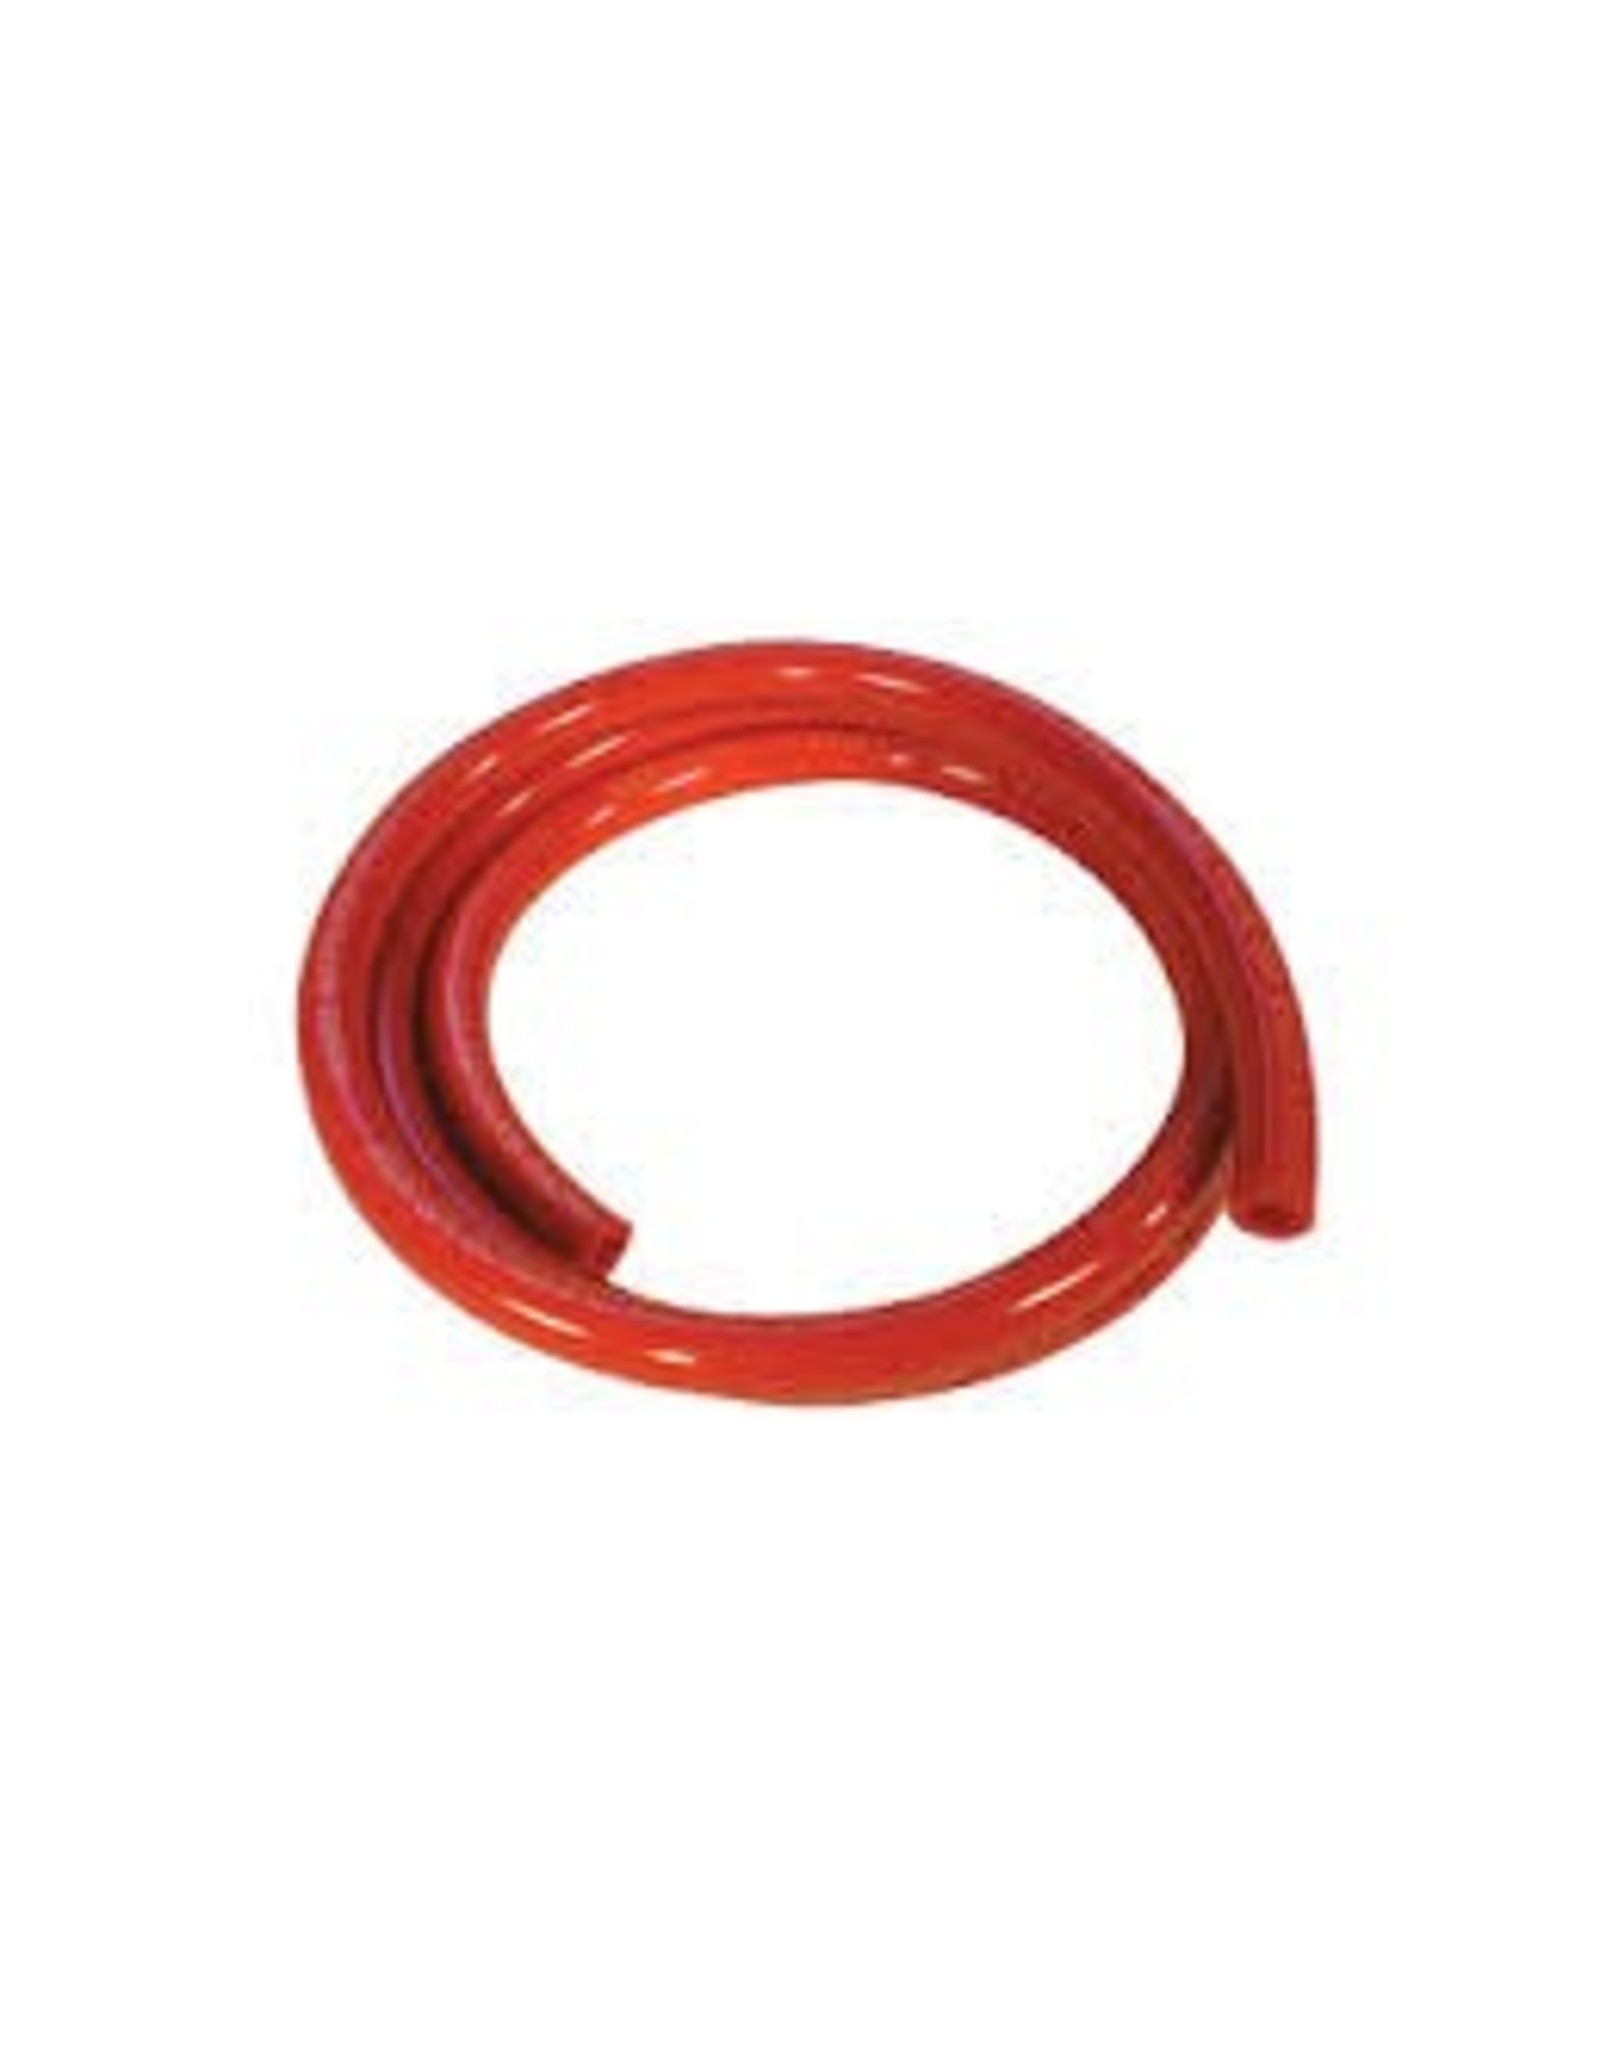 RED PVC GAS 3/8 INCH